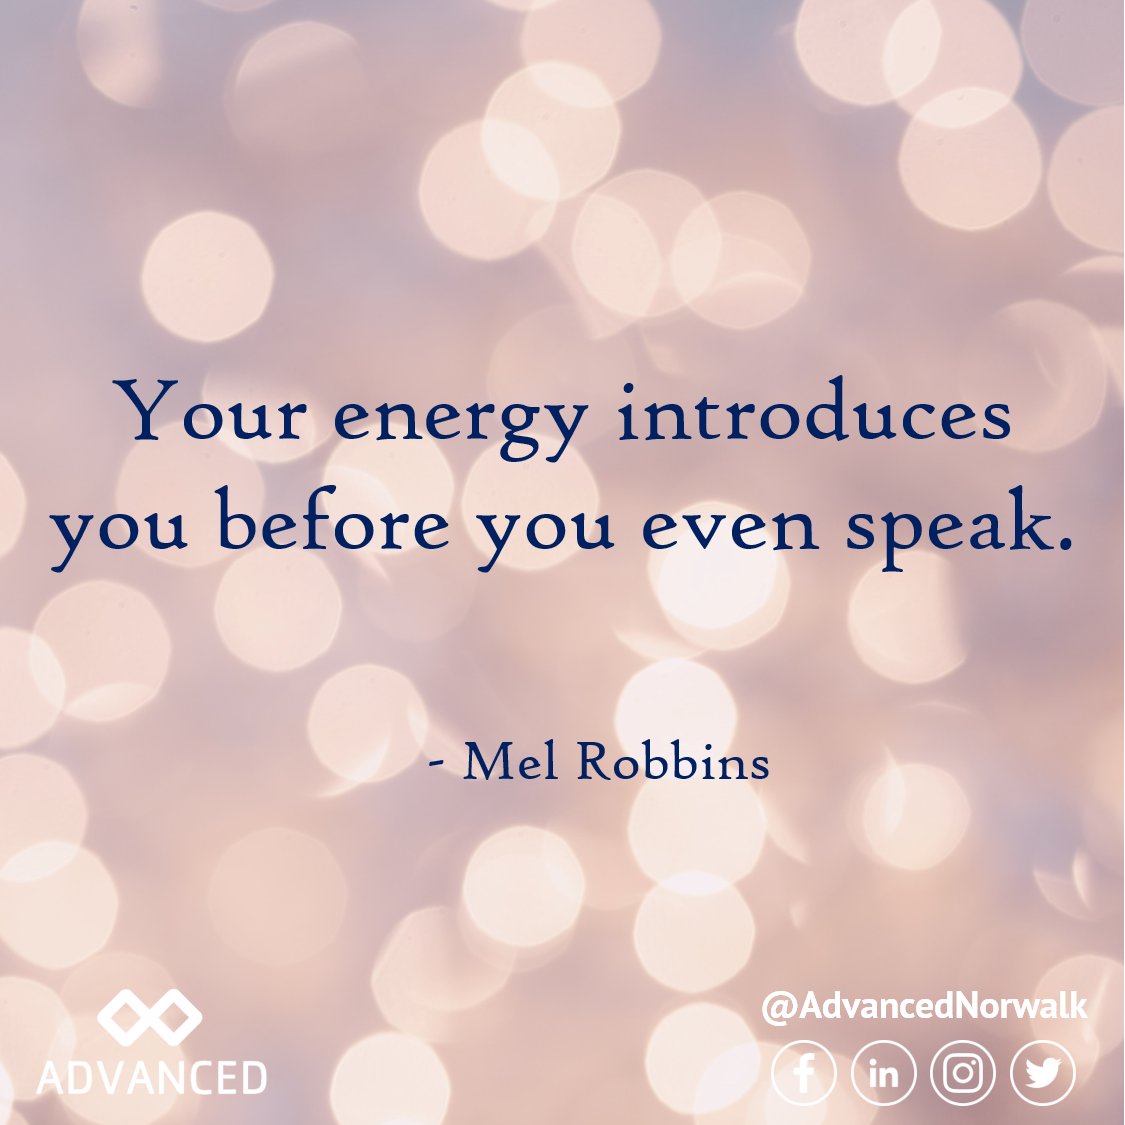 Your energy matters and will influence those around you in ways that you may not even realize. Emanate #positivity, #grace, and #authenticity, leave an indelible mark wherever you go.

#motivationmonday #positivevibes #mindfulmonday  #mindfullness #personalgrowth #inspireothers